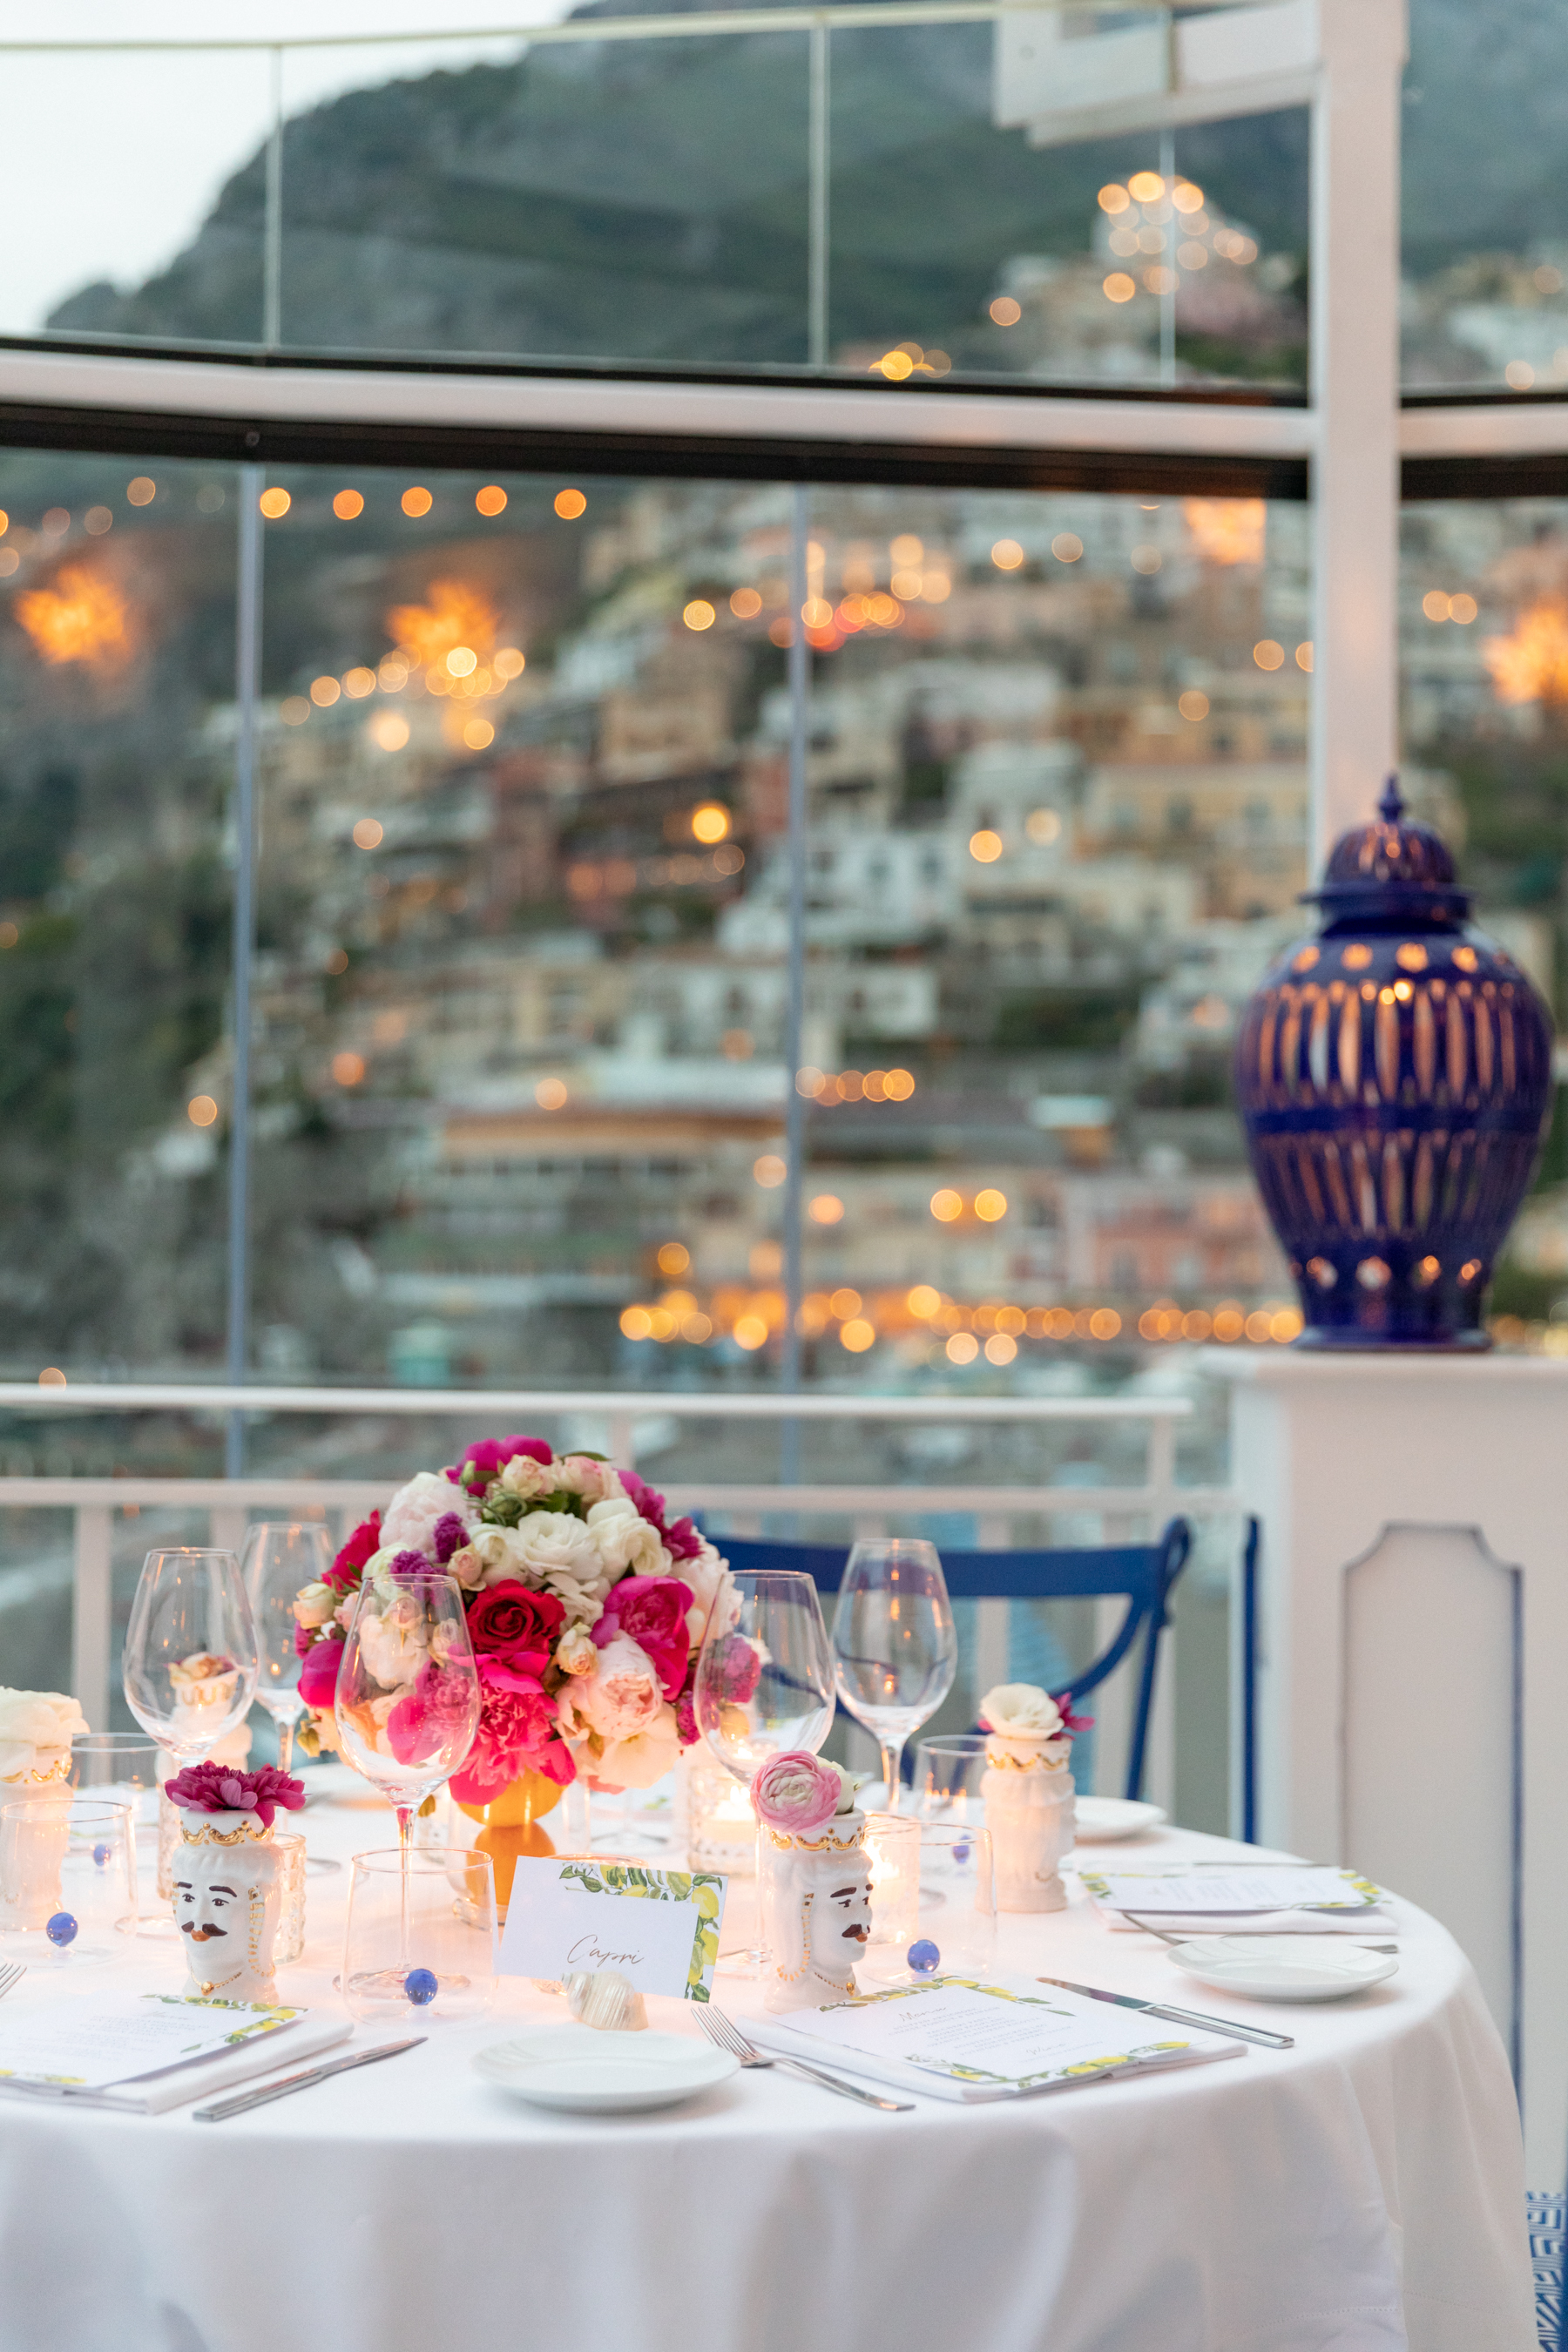 The wedding reception guests had the most beautiful view of Positano at night. 